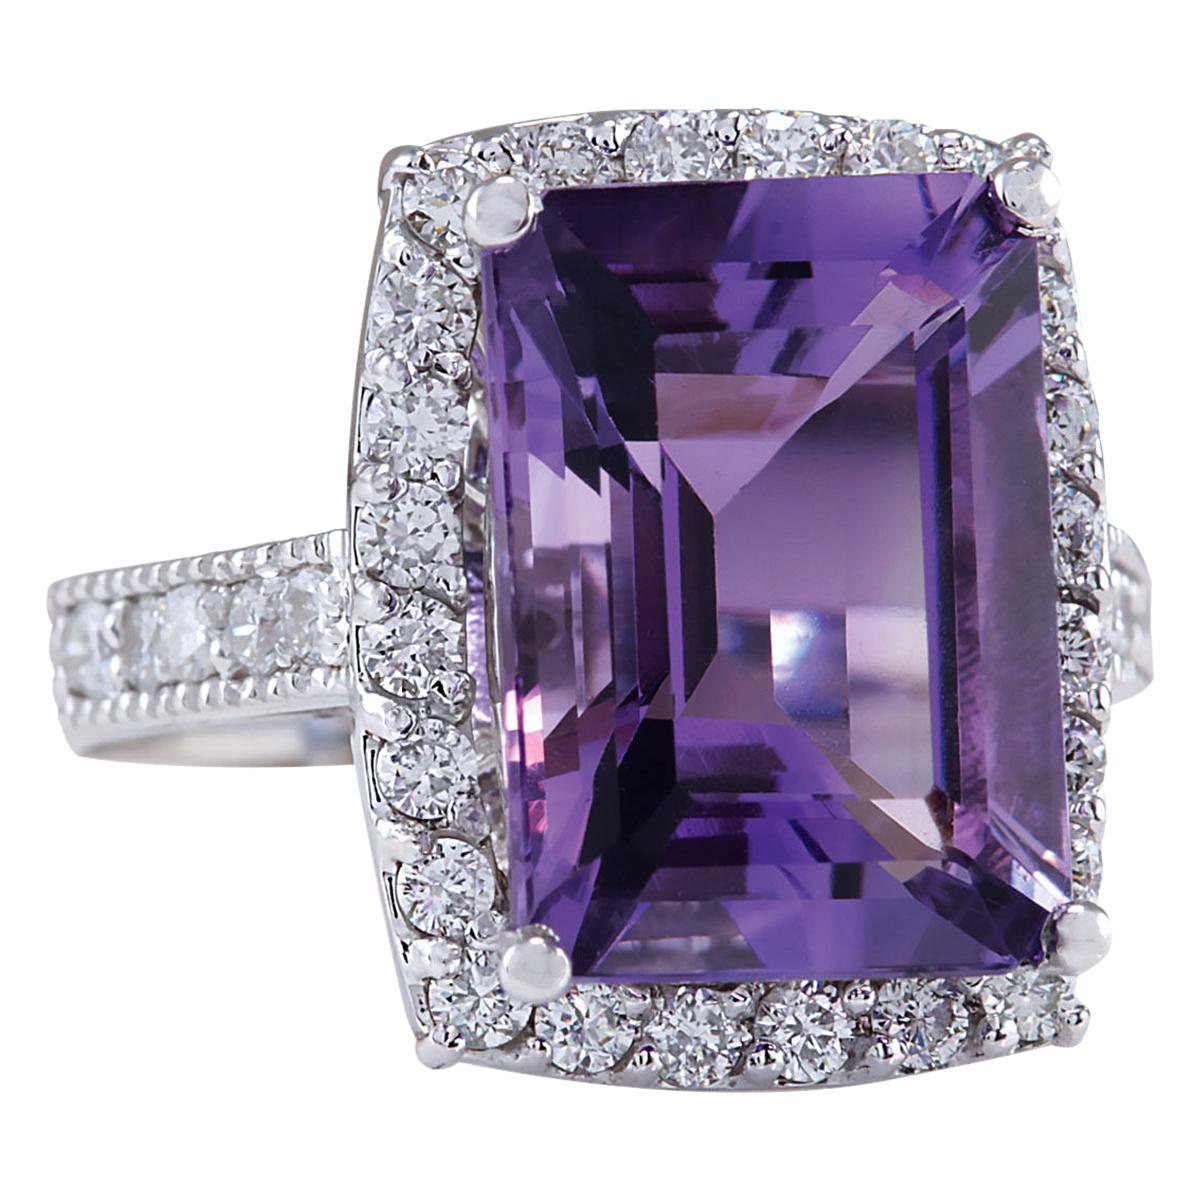 Stamped: 14K 
Total Ring Weight: 6.0 Grams
Total Natural Amethyst Weight is 6.29 Carat (Measures: 14.00x10.00 Millimeters)
Color: Purple
Total Natural Diamond Weight is 0.80 Carat
Color: F-G, Clarity: VS2-SI1
Ring Face Dimensions: 17.10x14.40